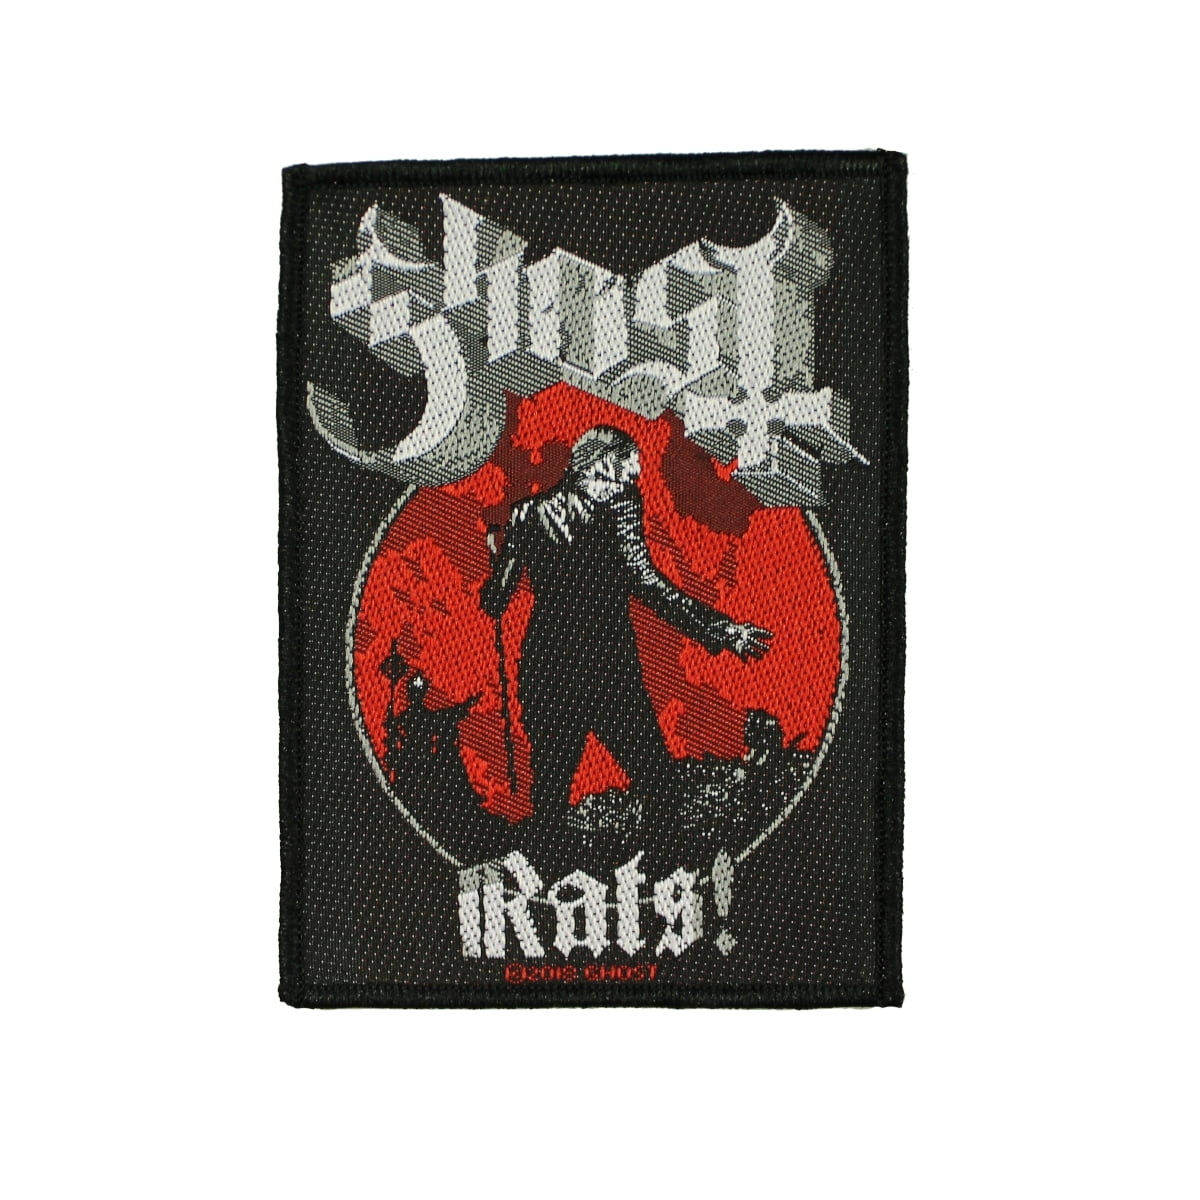 GHOST Embroidered Sew On/Iron On Logo Patch; nos like new Swedish Metal Band 